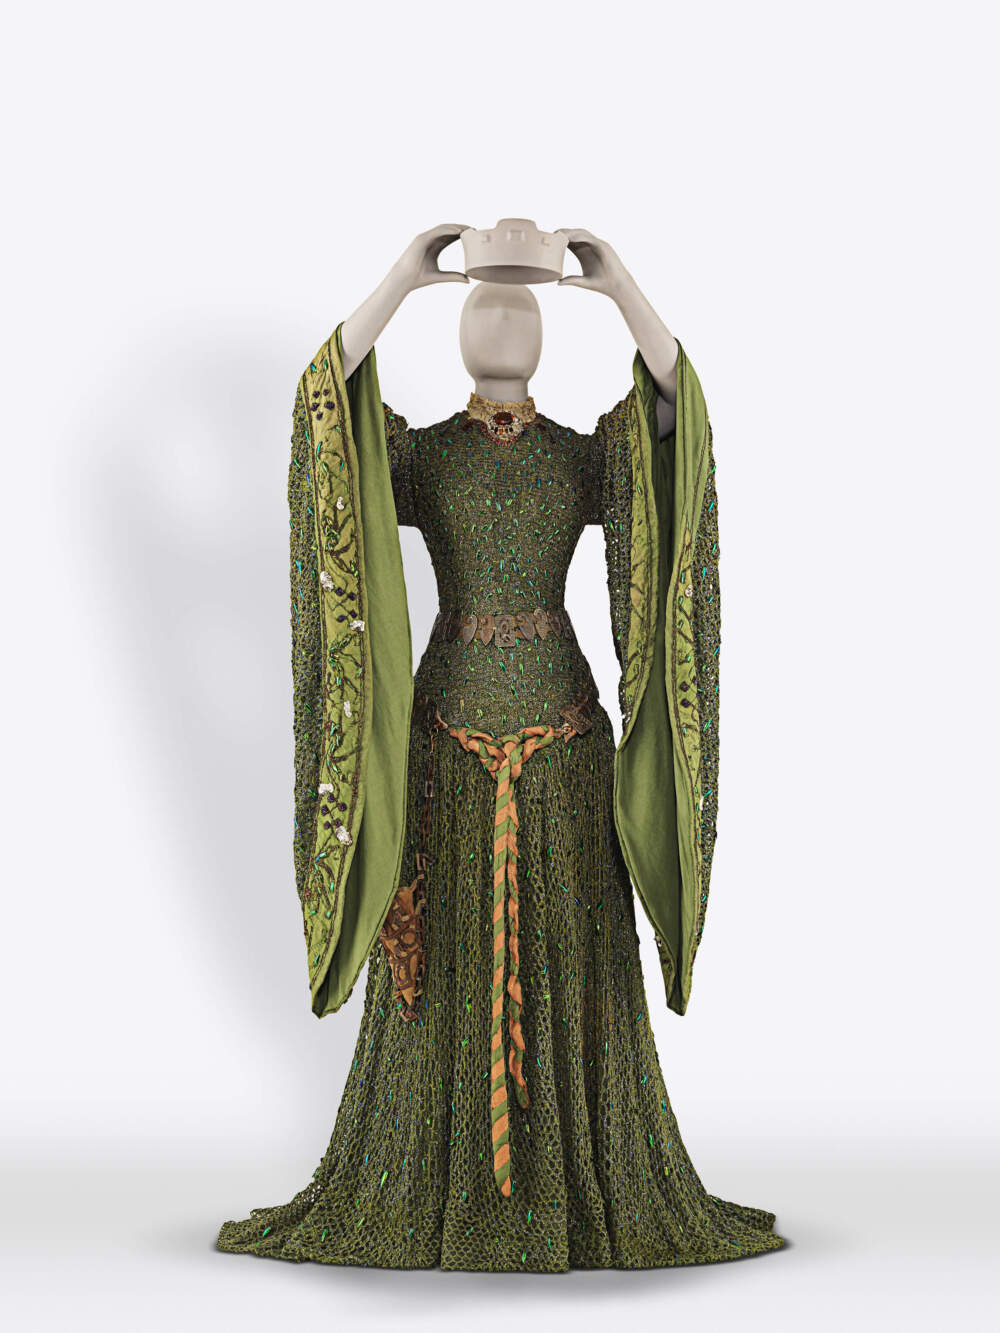 'Beetle Wing Dress' for Lady Macbeth. (Courtesy Museum of Fine Arts)